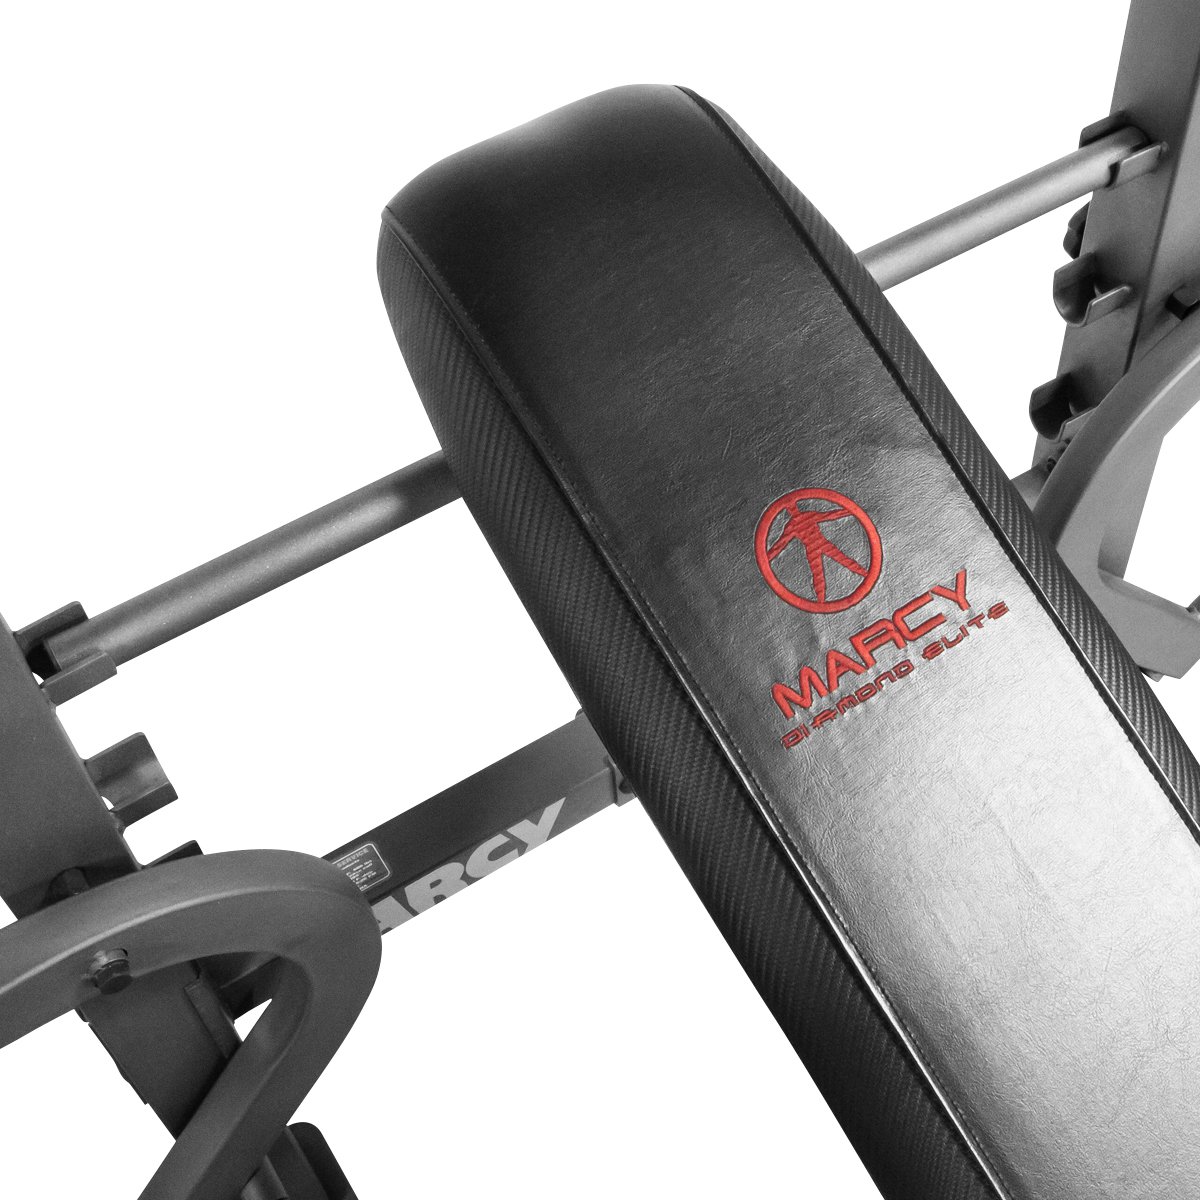 Marcy Adjustable Standard Weight Bench with Butterfly MD-389 - image 3 of 7